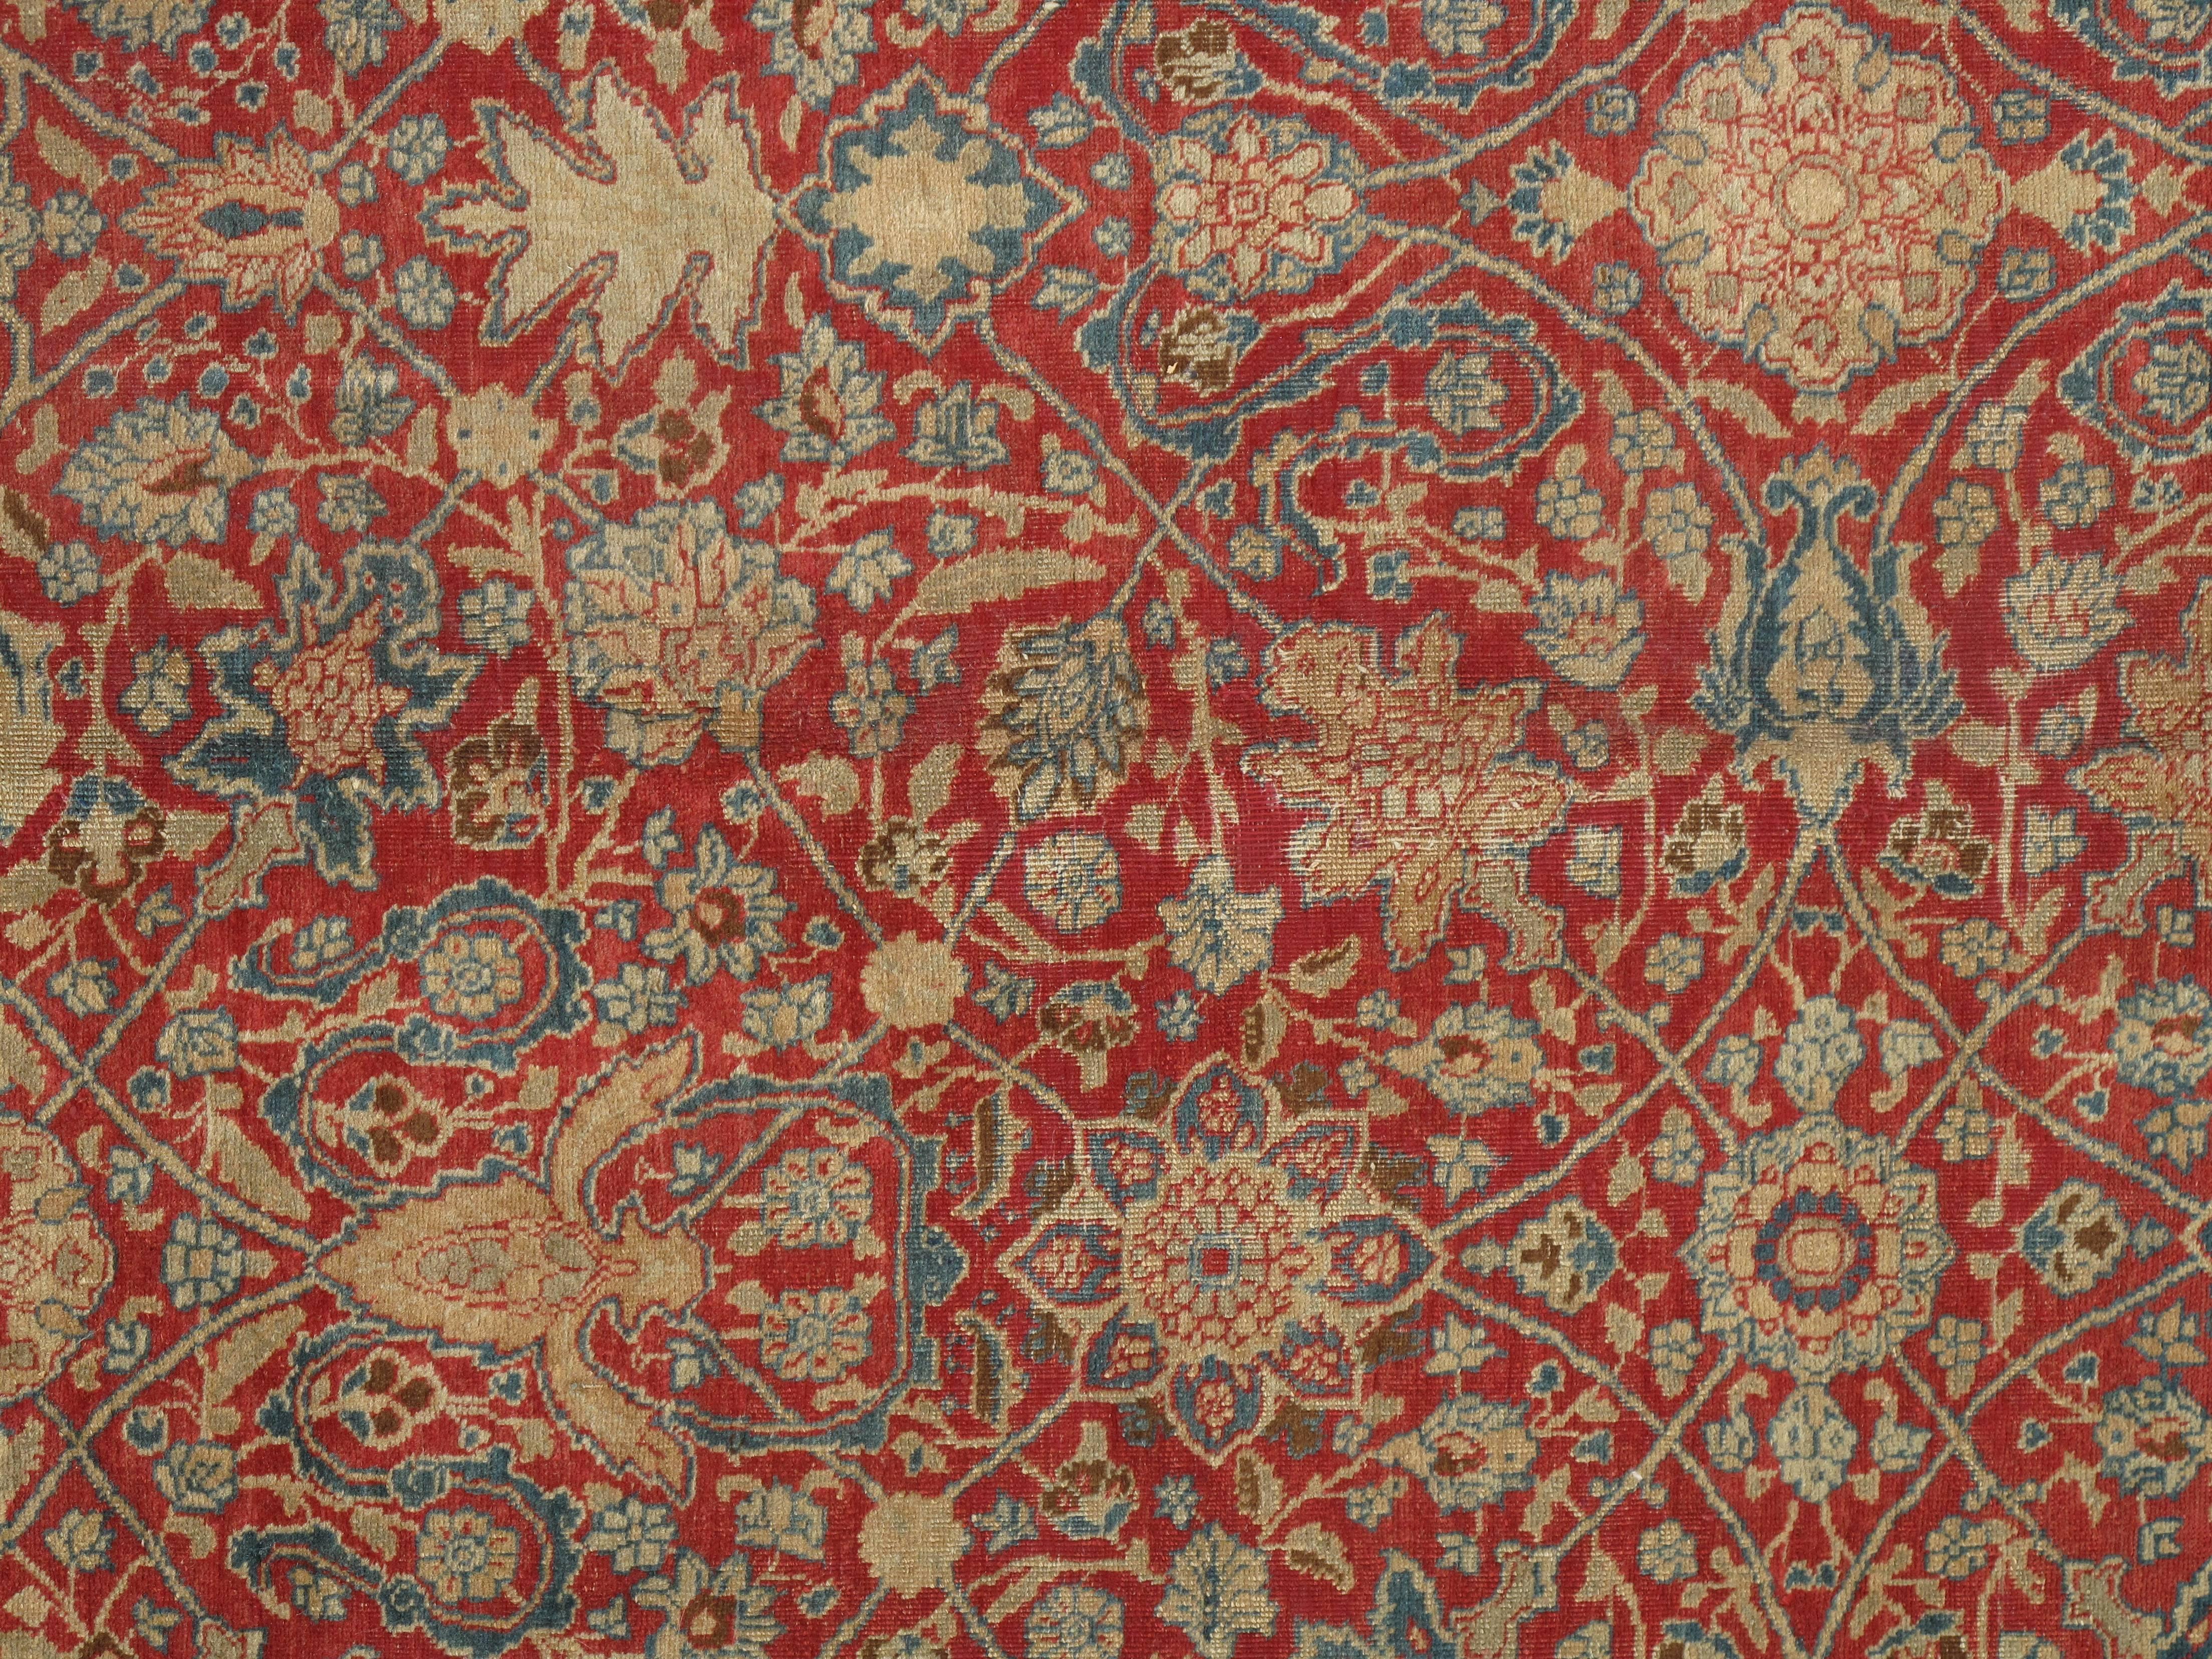 Antique Tabriz rugs are distinguished by their excellent weave and by their remarkable adherence to the classical traditions of Persian rug design. The city of Tabriz, situated in Northwest region of Persia, was the earliest capital of the Safavid